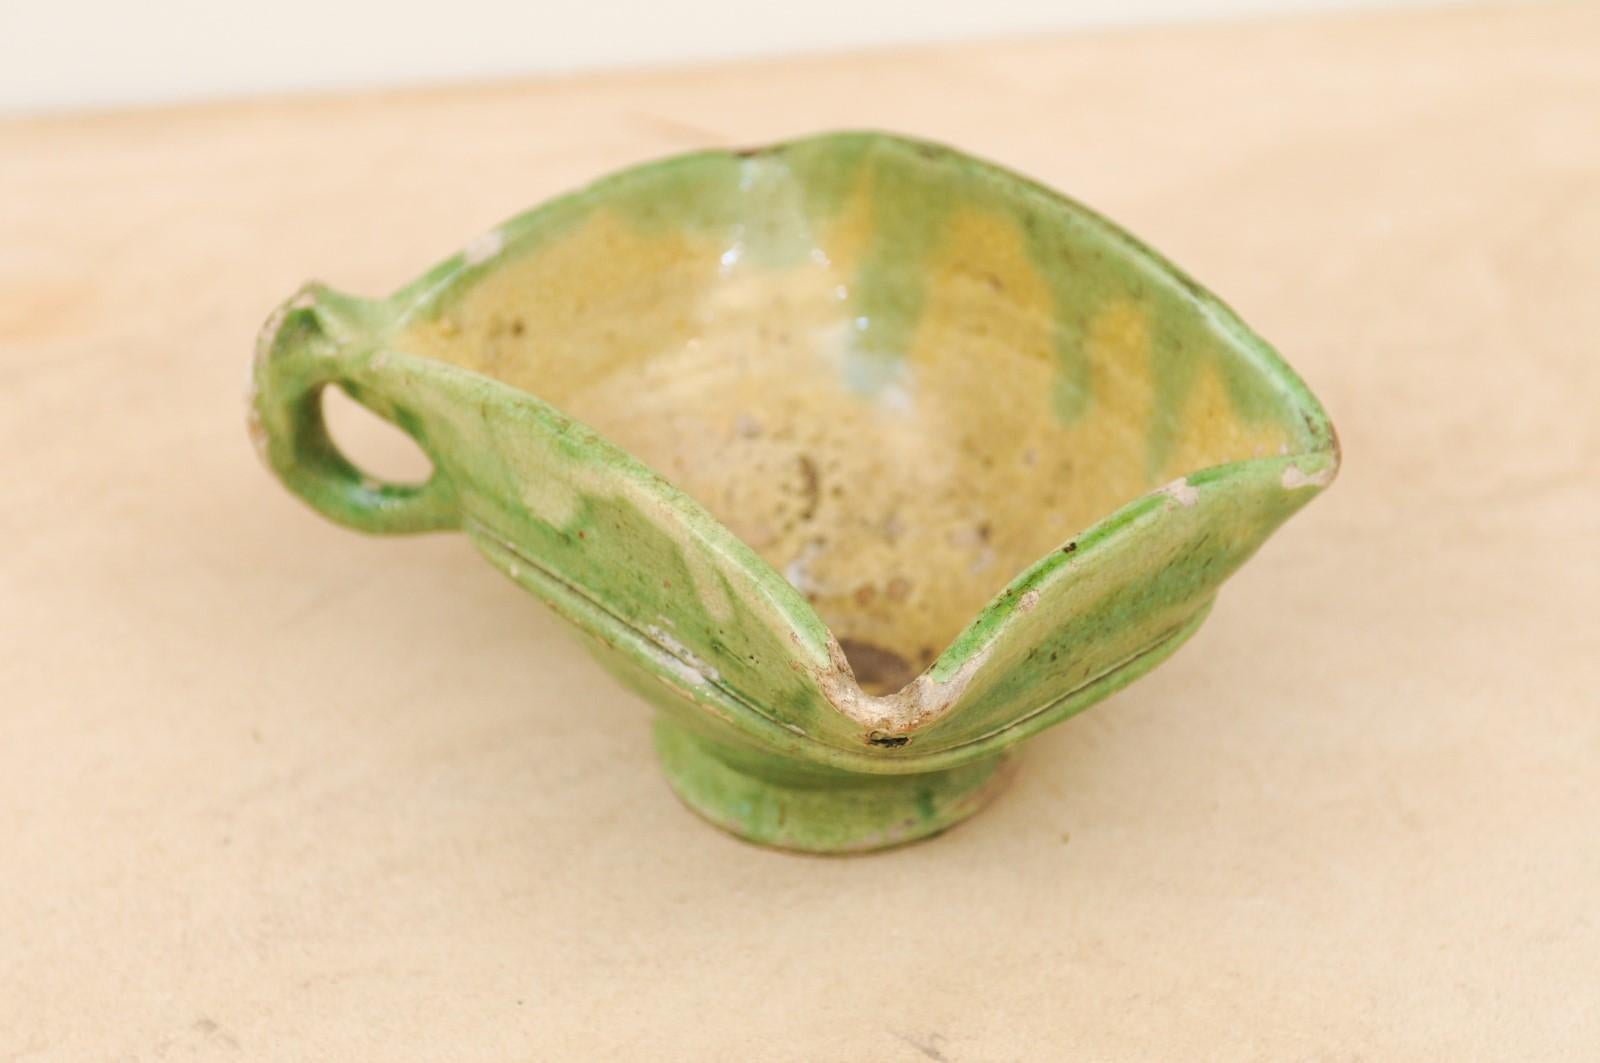 Pottery Rustic French 19th Century Green Glazed Square-Shaped Bowl with Weathered Patina For Sale